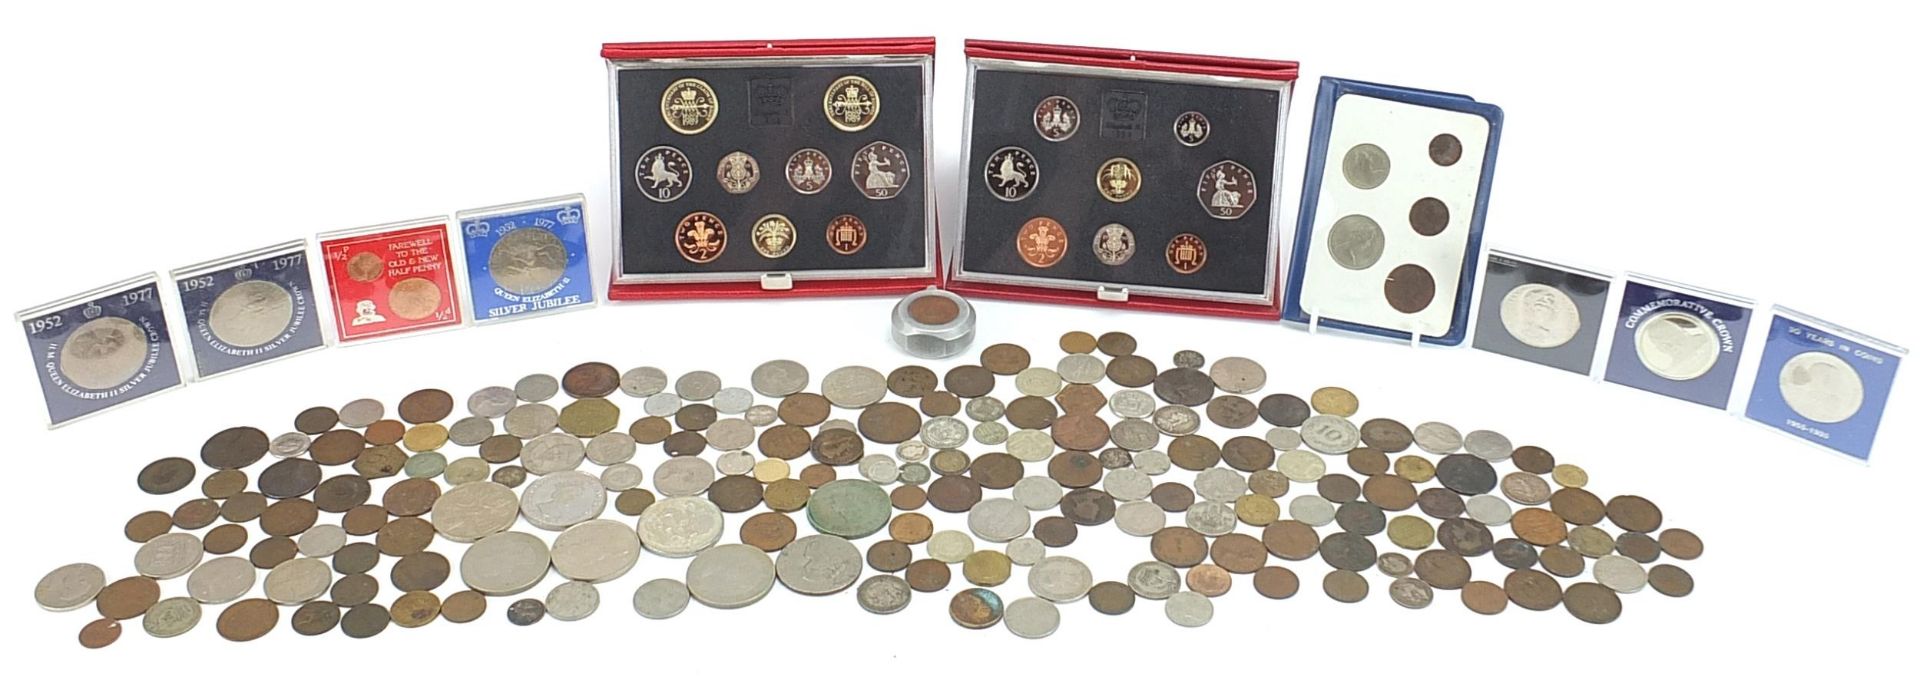 Antique and later British and world coinage, some silver including Royal Mint 1989 and 1990 United